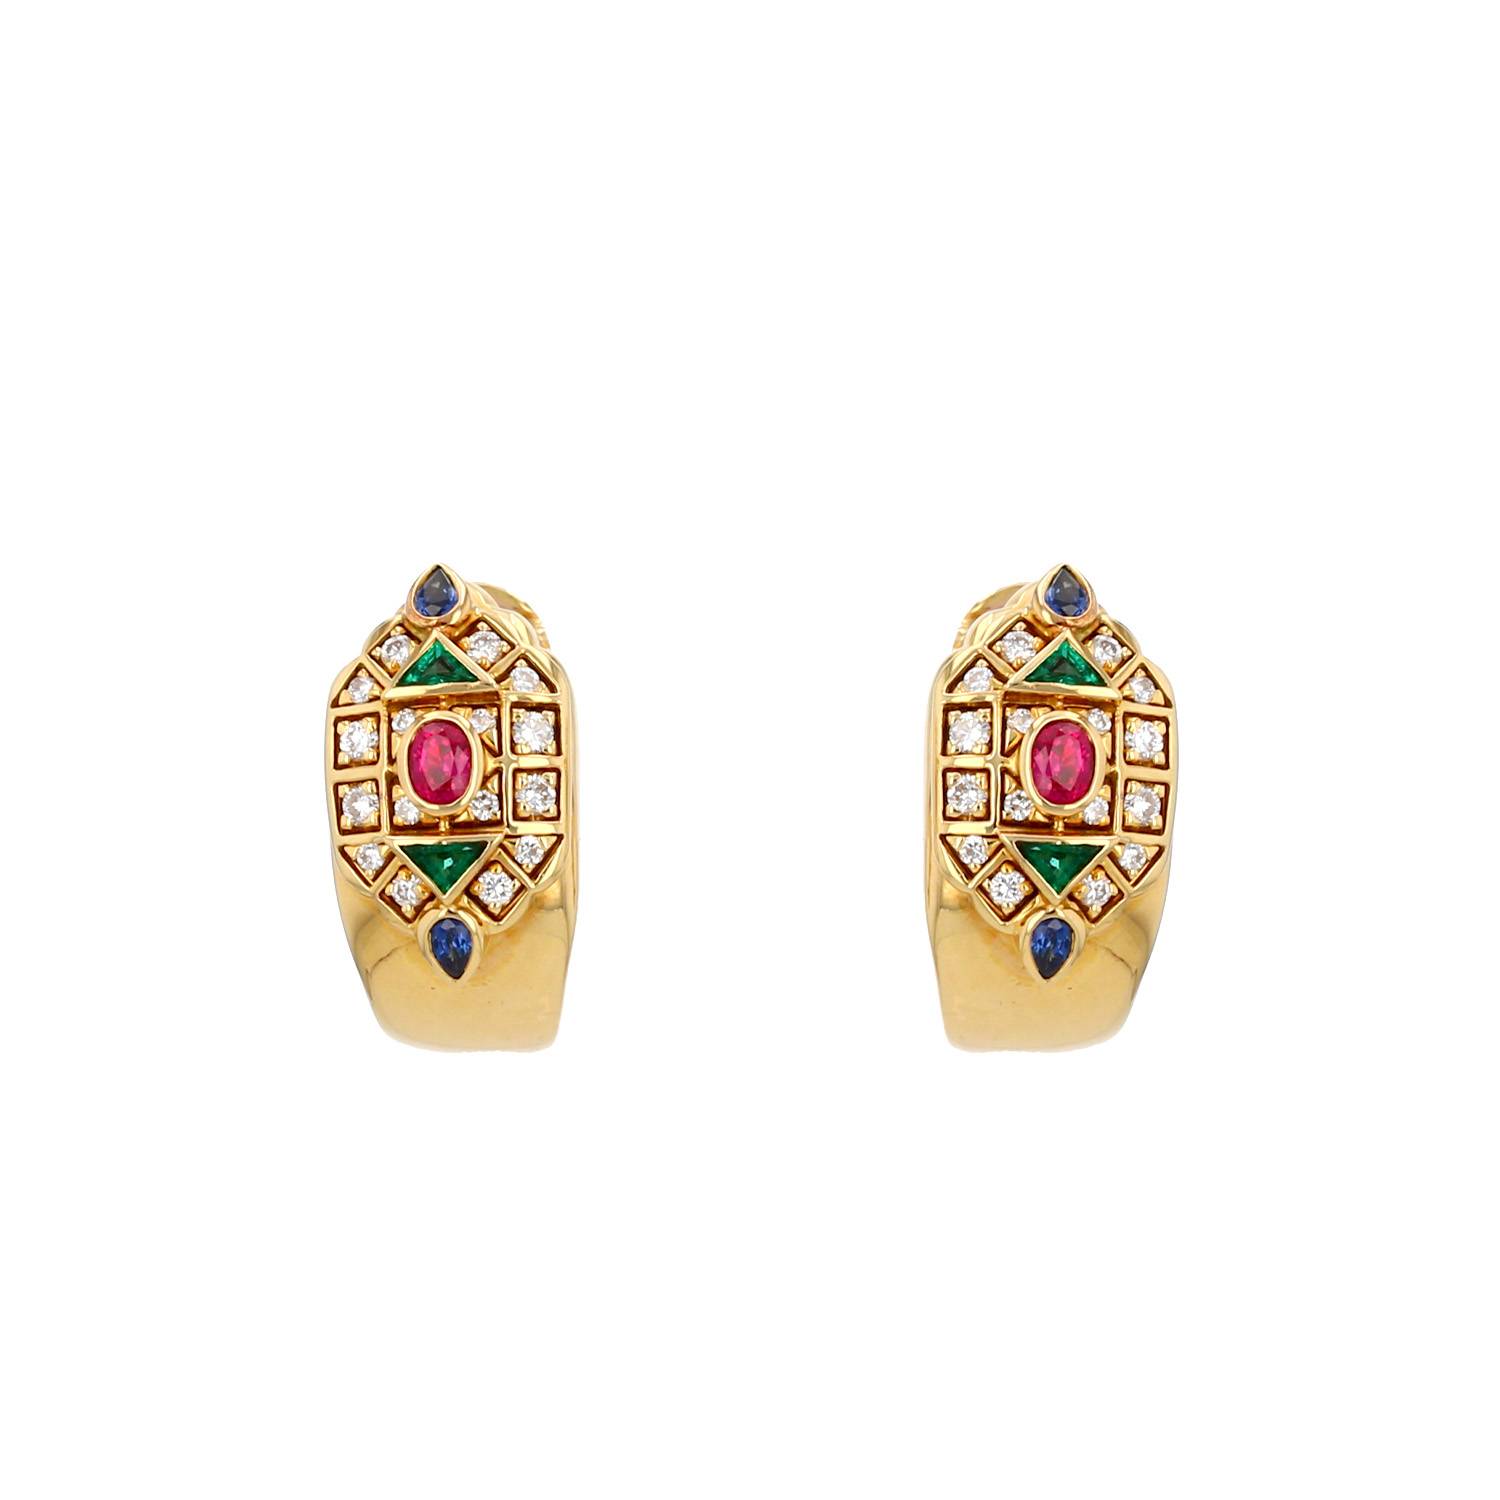 Byzantine Earrings In Yellow , Diamonds And Colored Stones